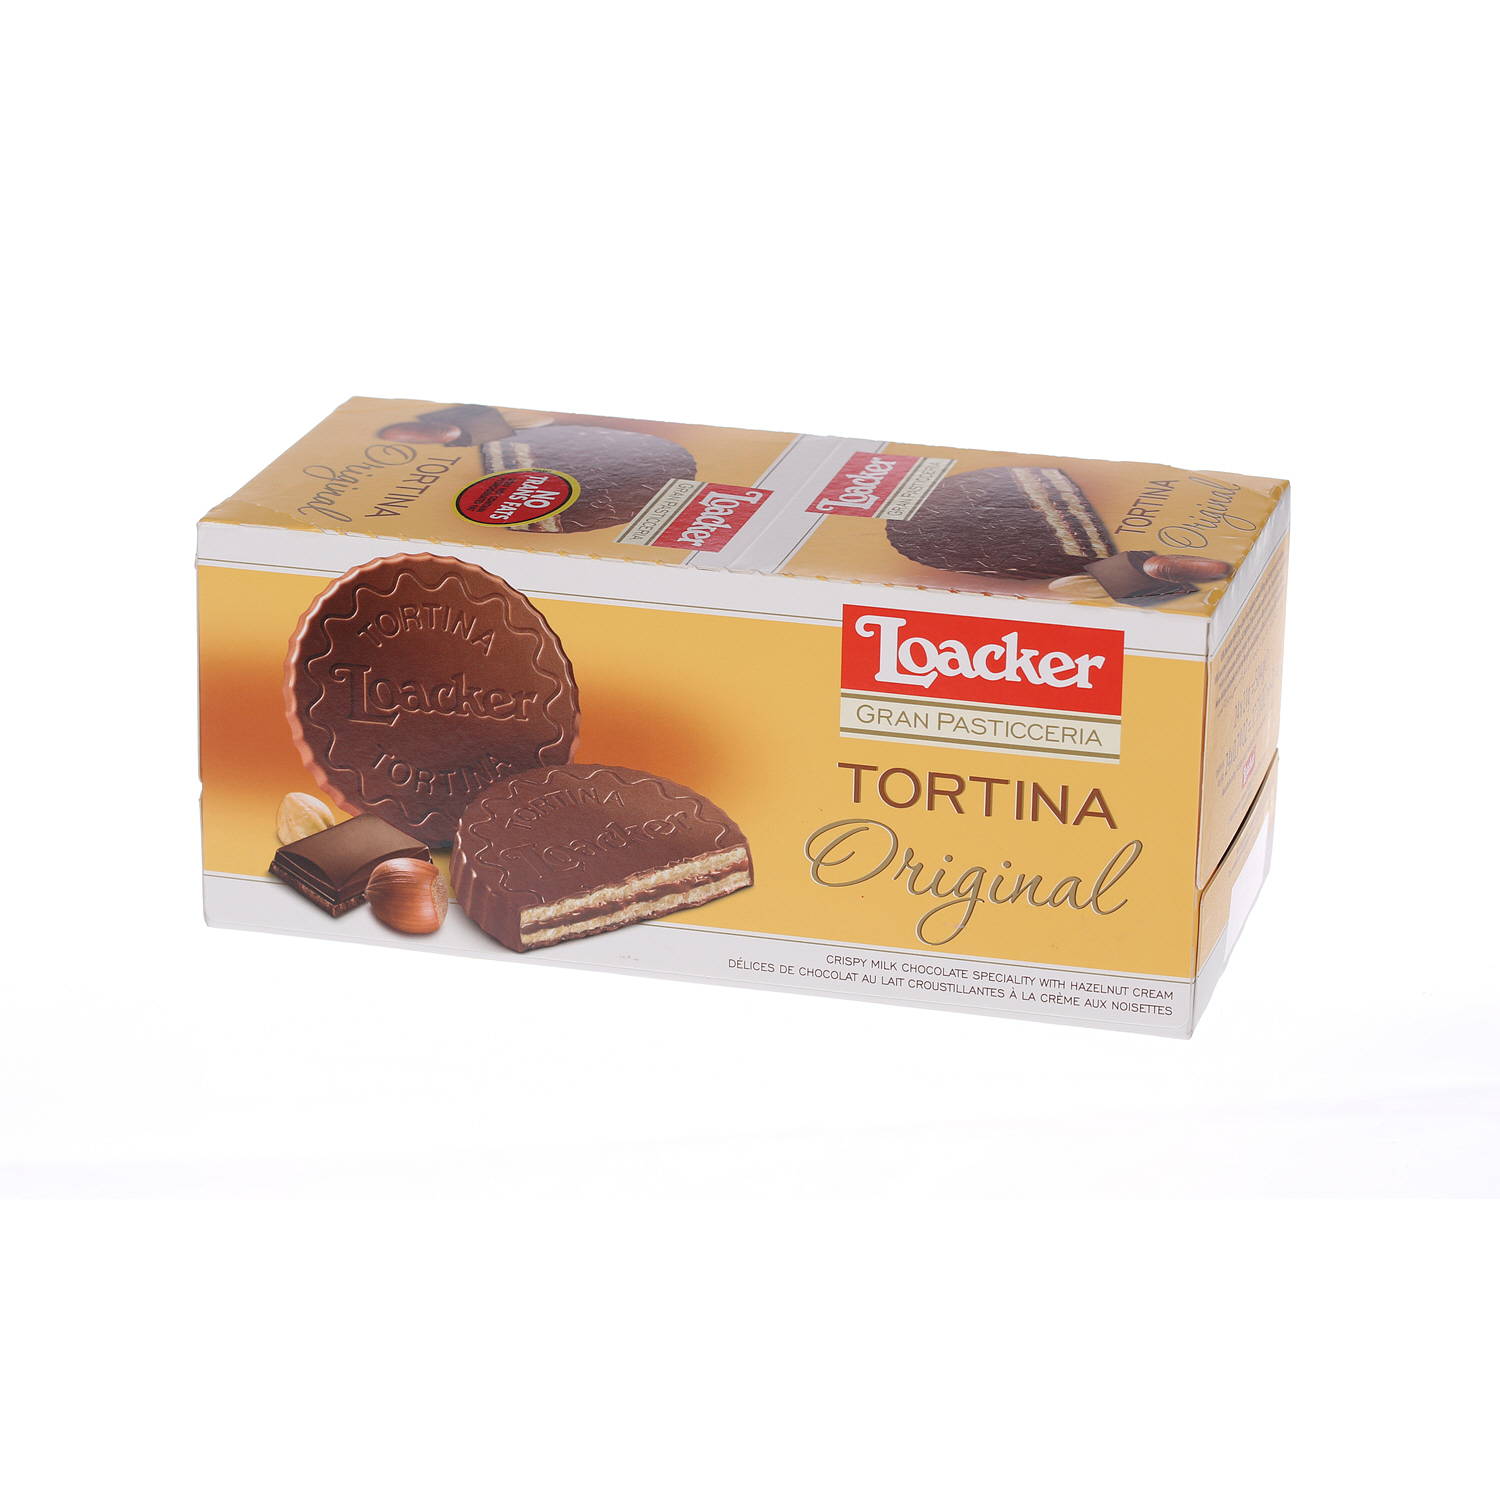 Loacker Tortina Chocolate Biscuits Sandwich 21 g × 24 Pieces